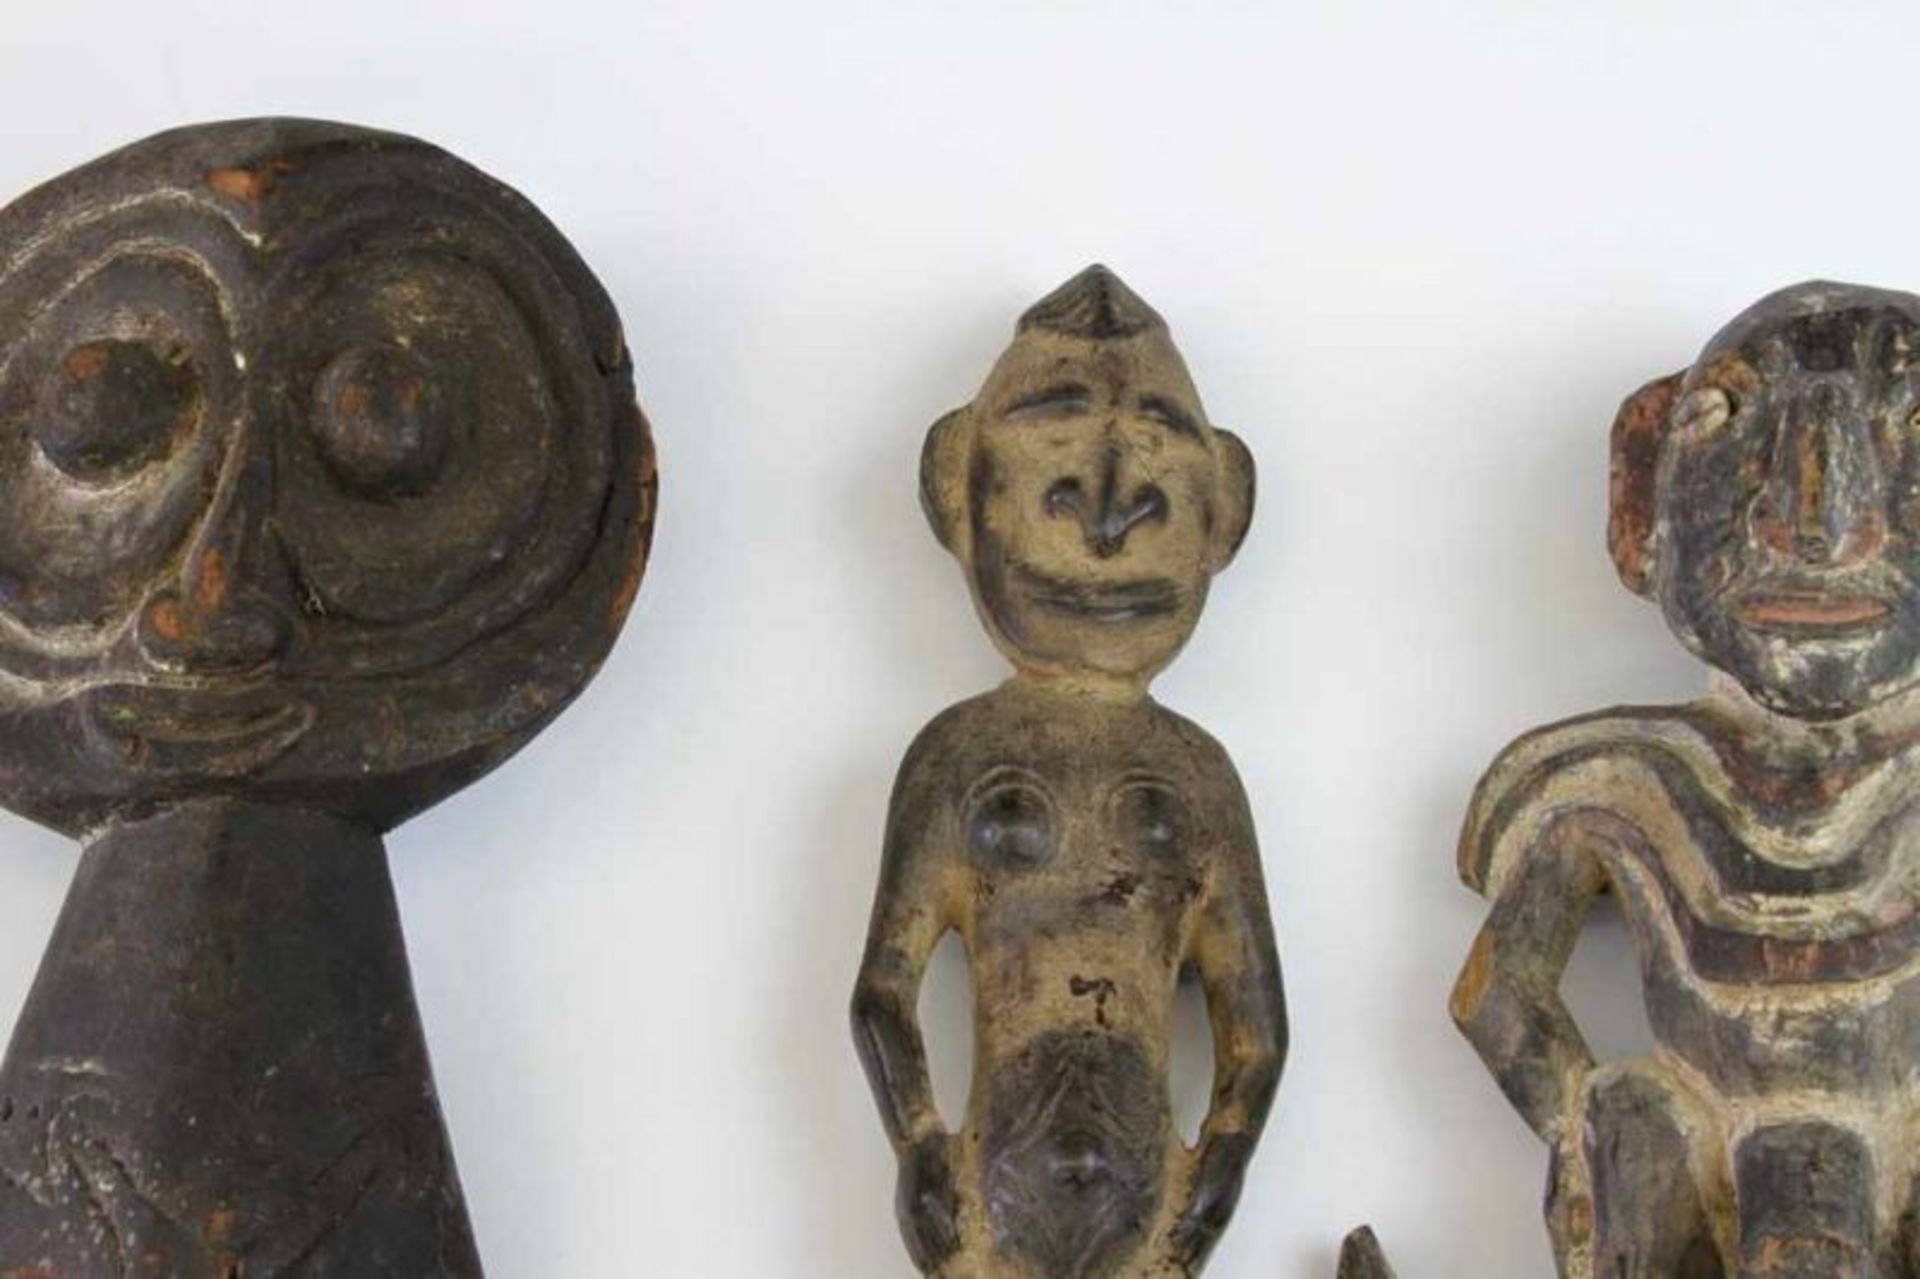 PNG, Sepik, wooden hook figure,with carved concave face, four arrows on rhombic shaped body. With - Bild 2 aus 4